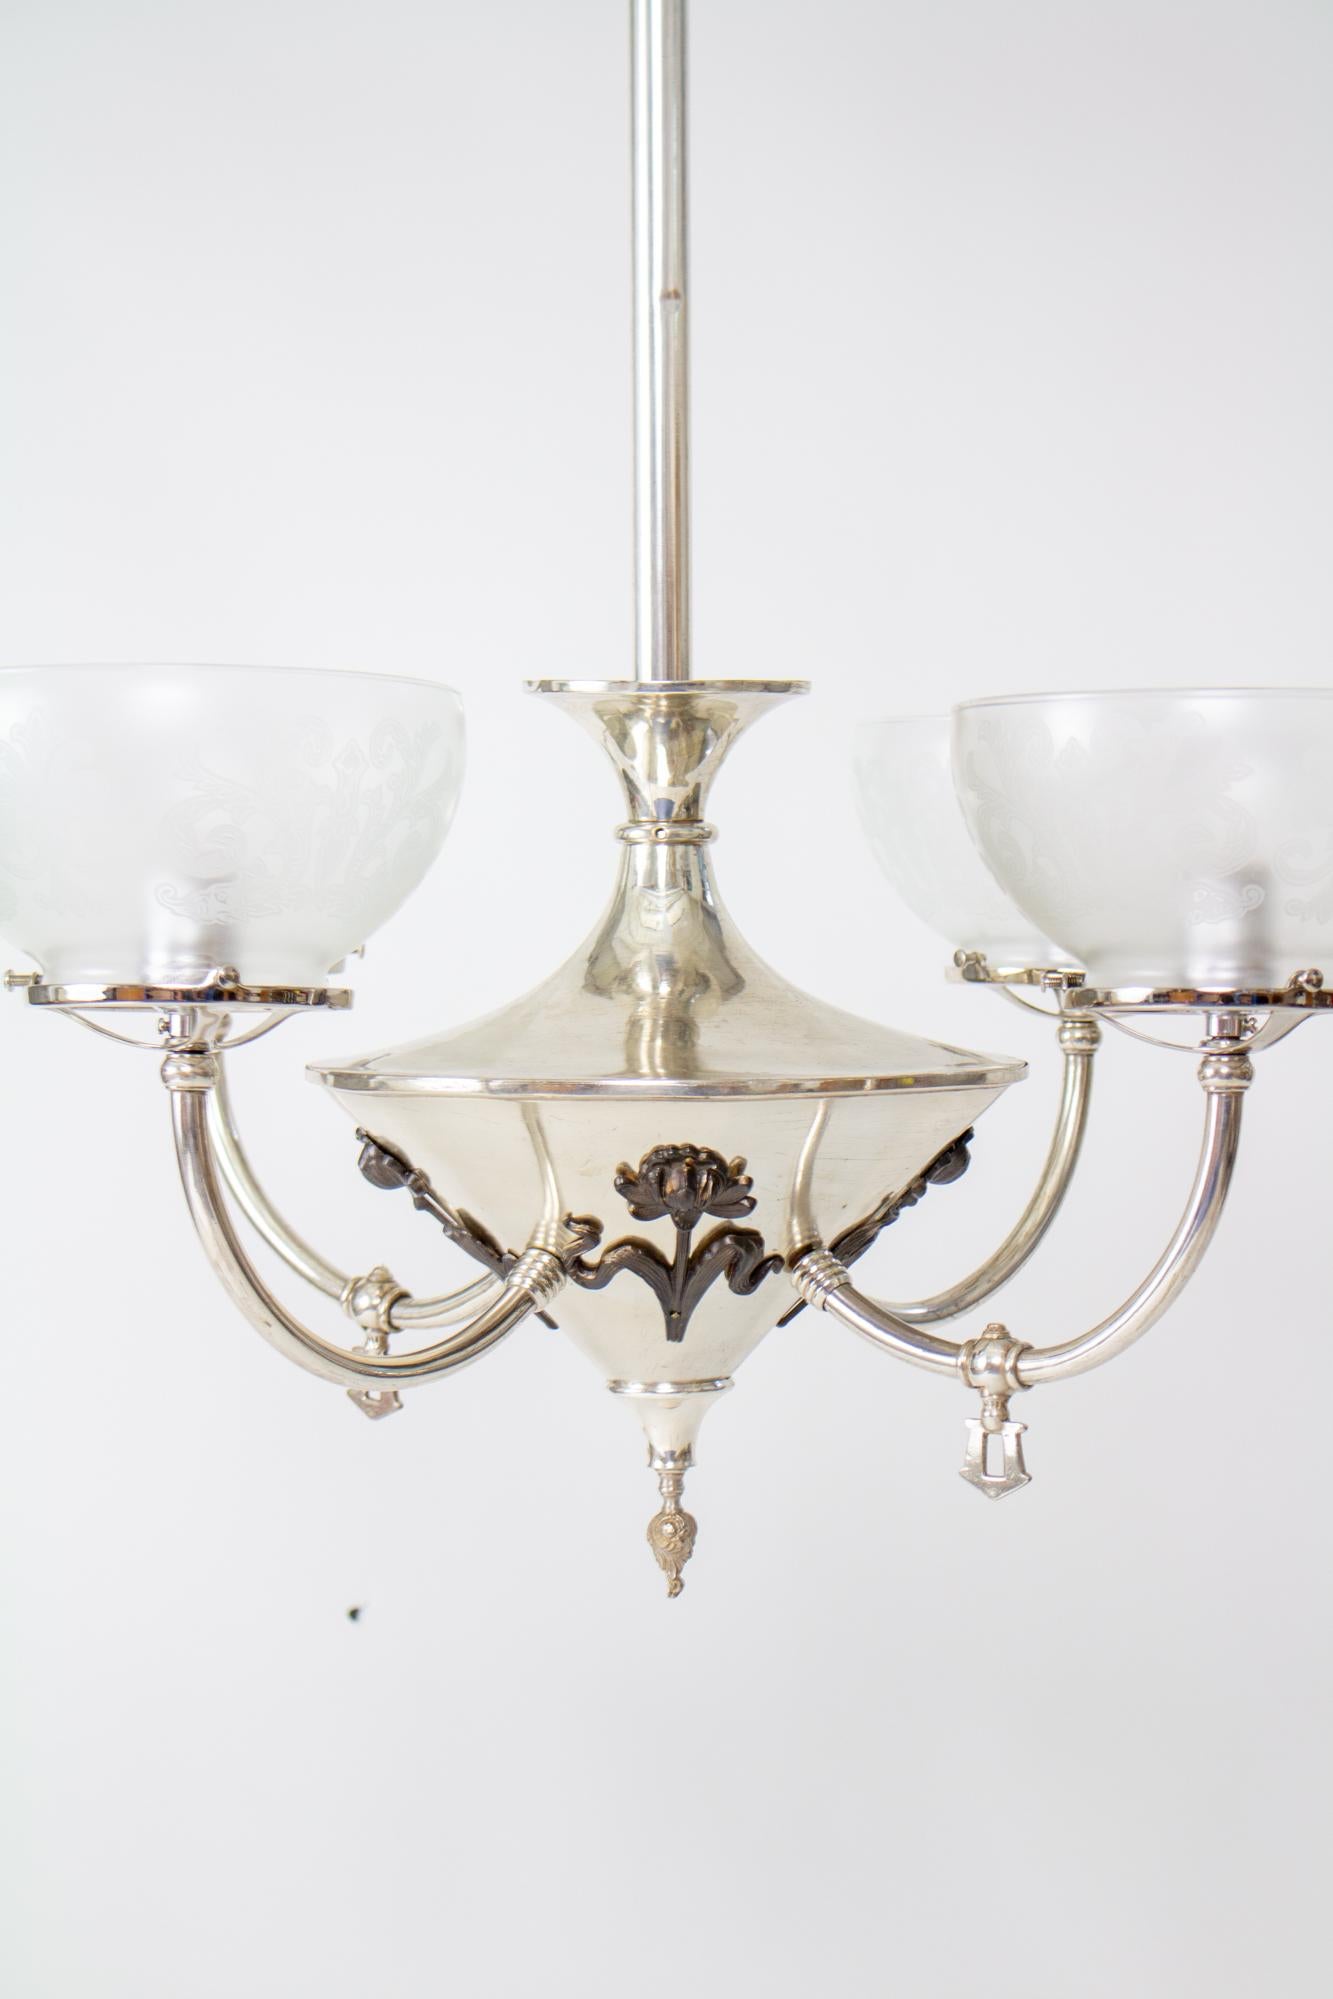 North American Four Light Silver Art Nouveau Gas and Electric Chandelier For Sale